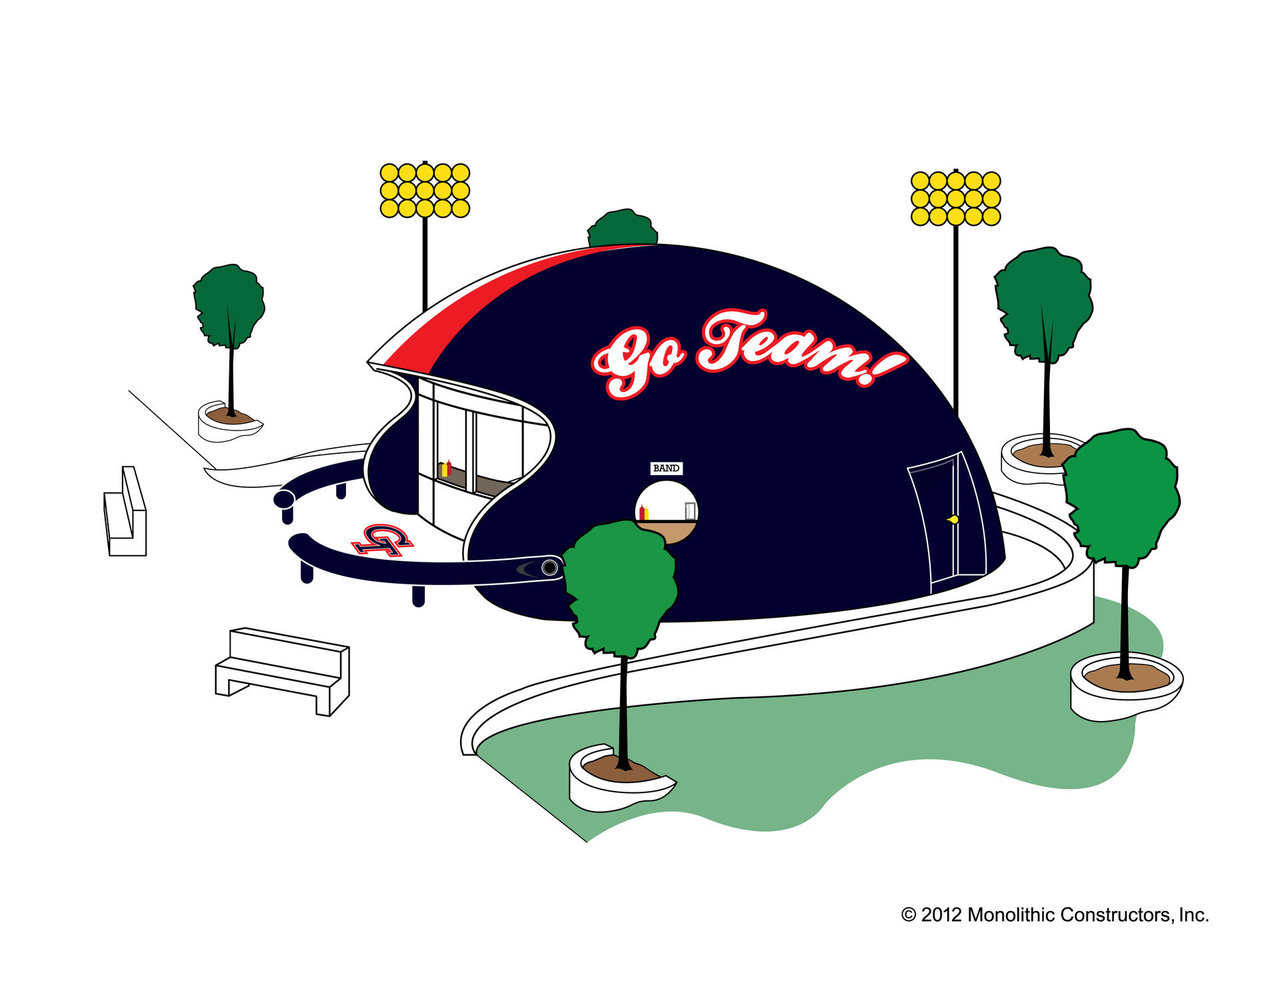 Pump up team pride and spirit with a football helmet-shaped concession dome! These cheerful domes will add even more excitement to games, offer shelter from storms and reduce maintenance cost.